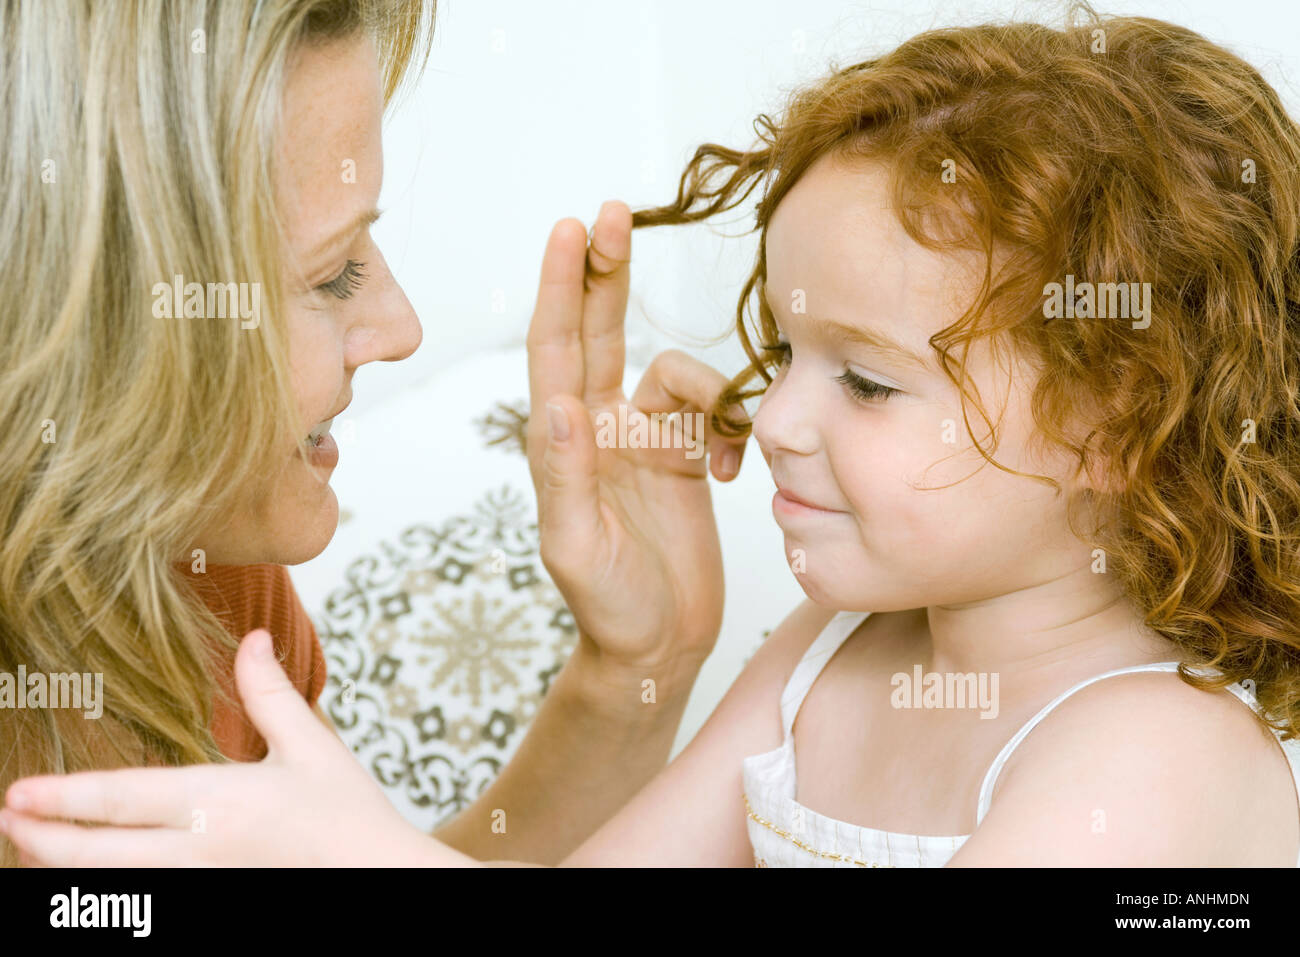 Mother and daughter touching each other's hair, both smiling Stock Photo